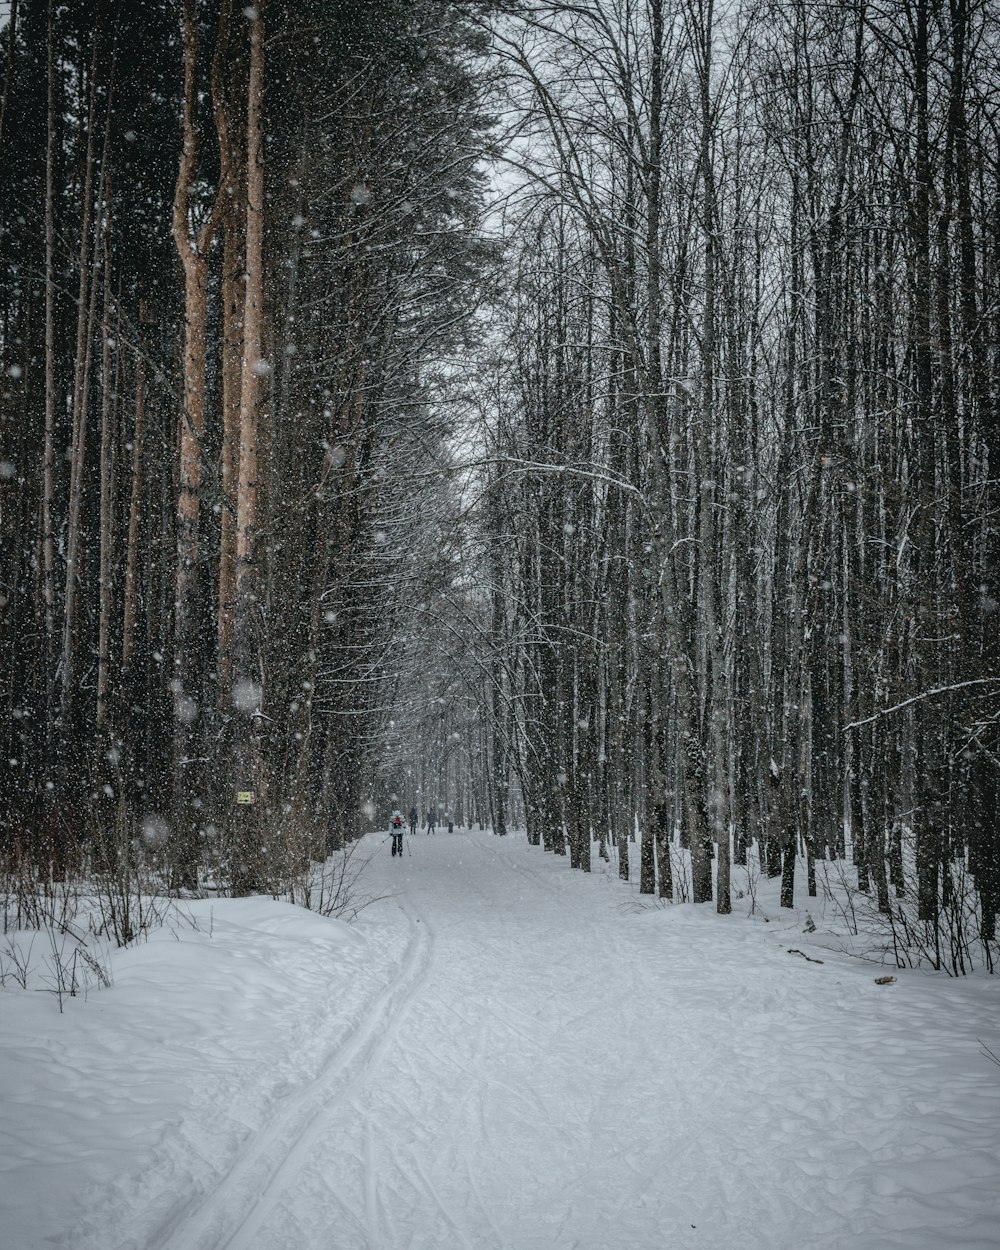 a snowy path in the woods with a person on it